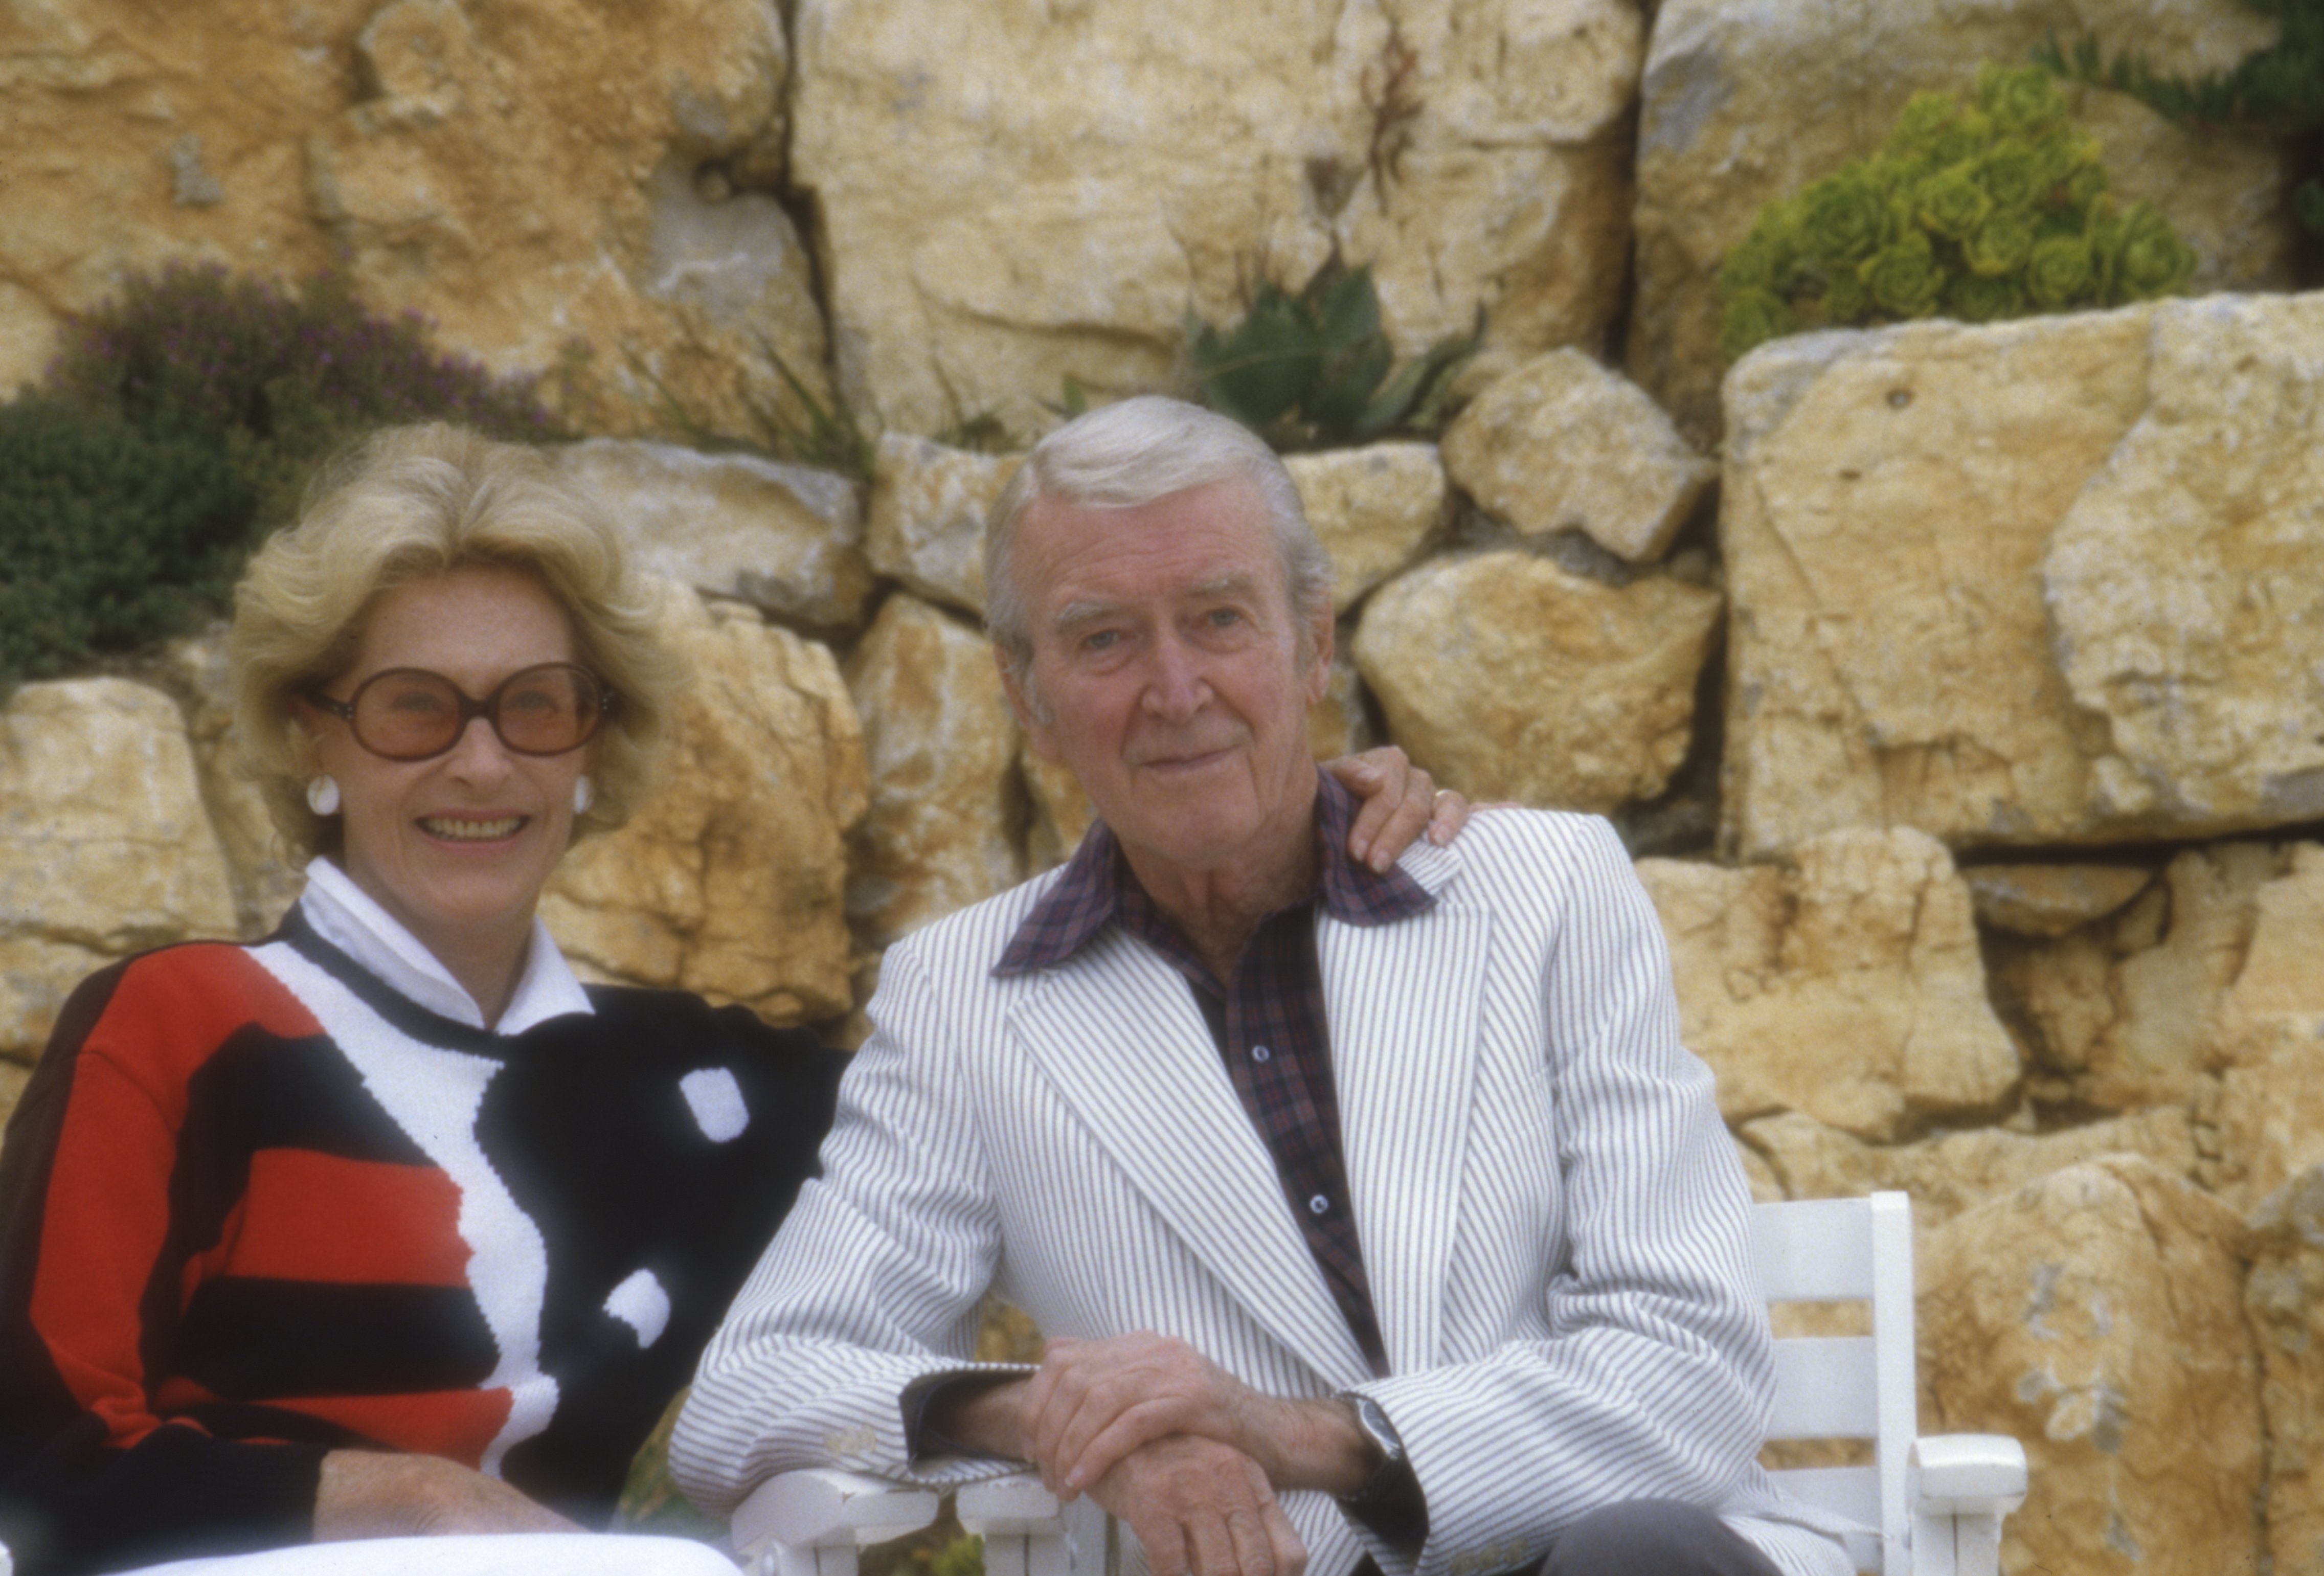 Gloria Hatrick McLean and James Stewart at the Cannes Film Festival in France on January 5, 1984. | Source: Micheline Pelletier/Gamma-Rapho/Getty Images